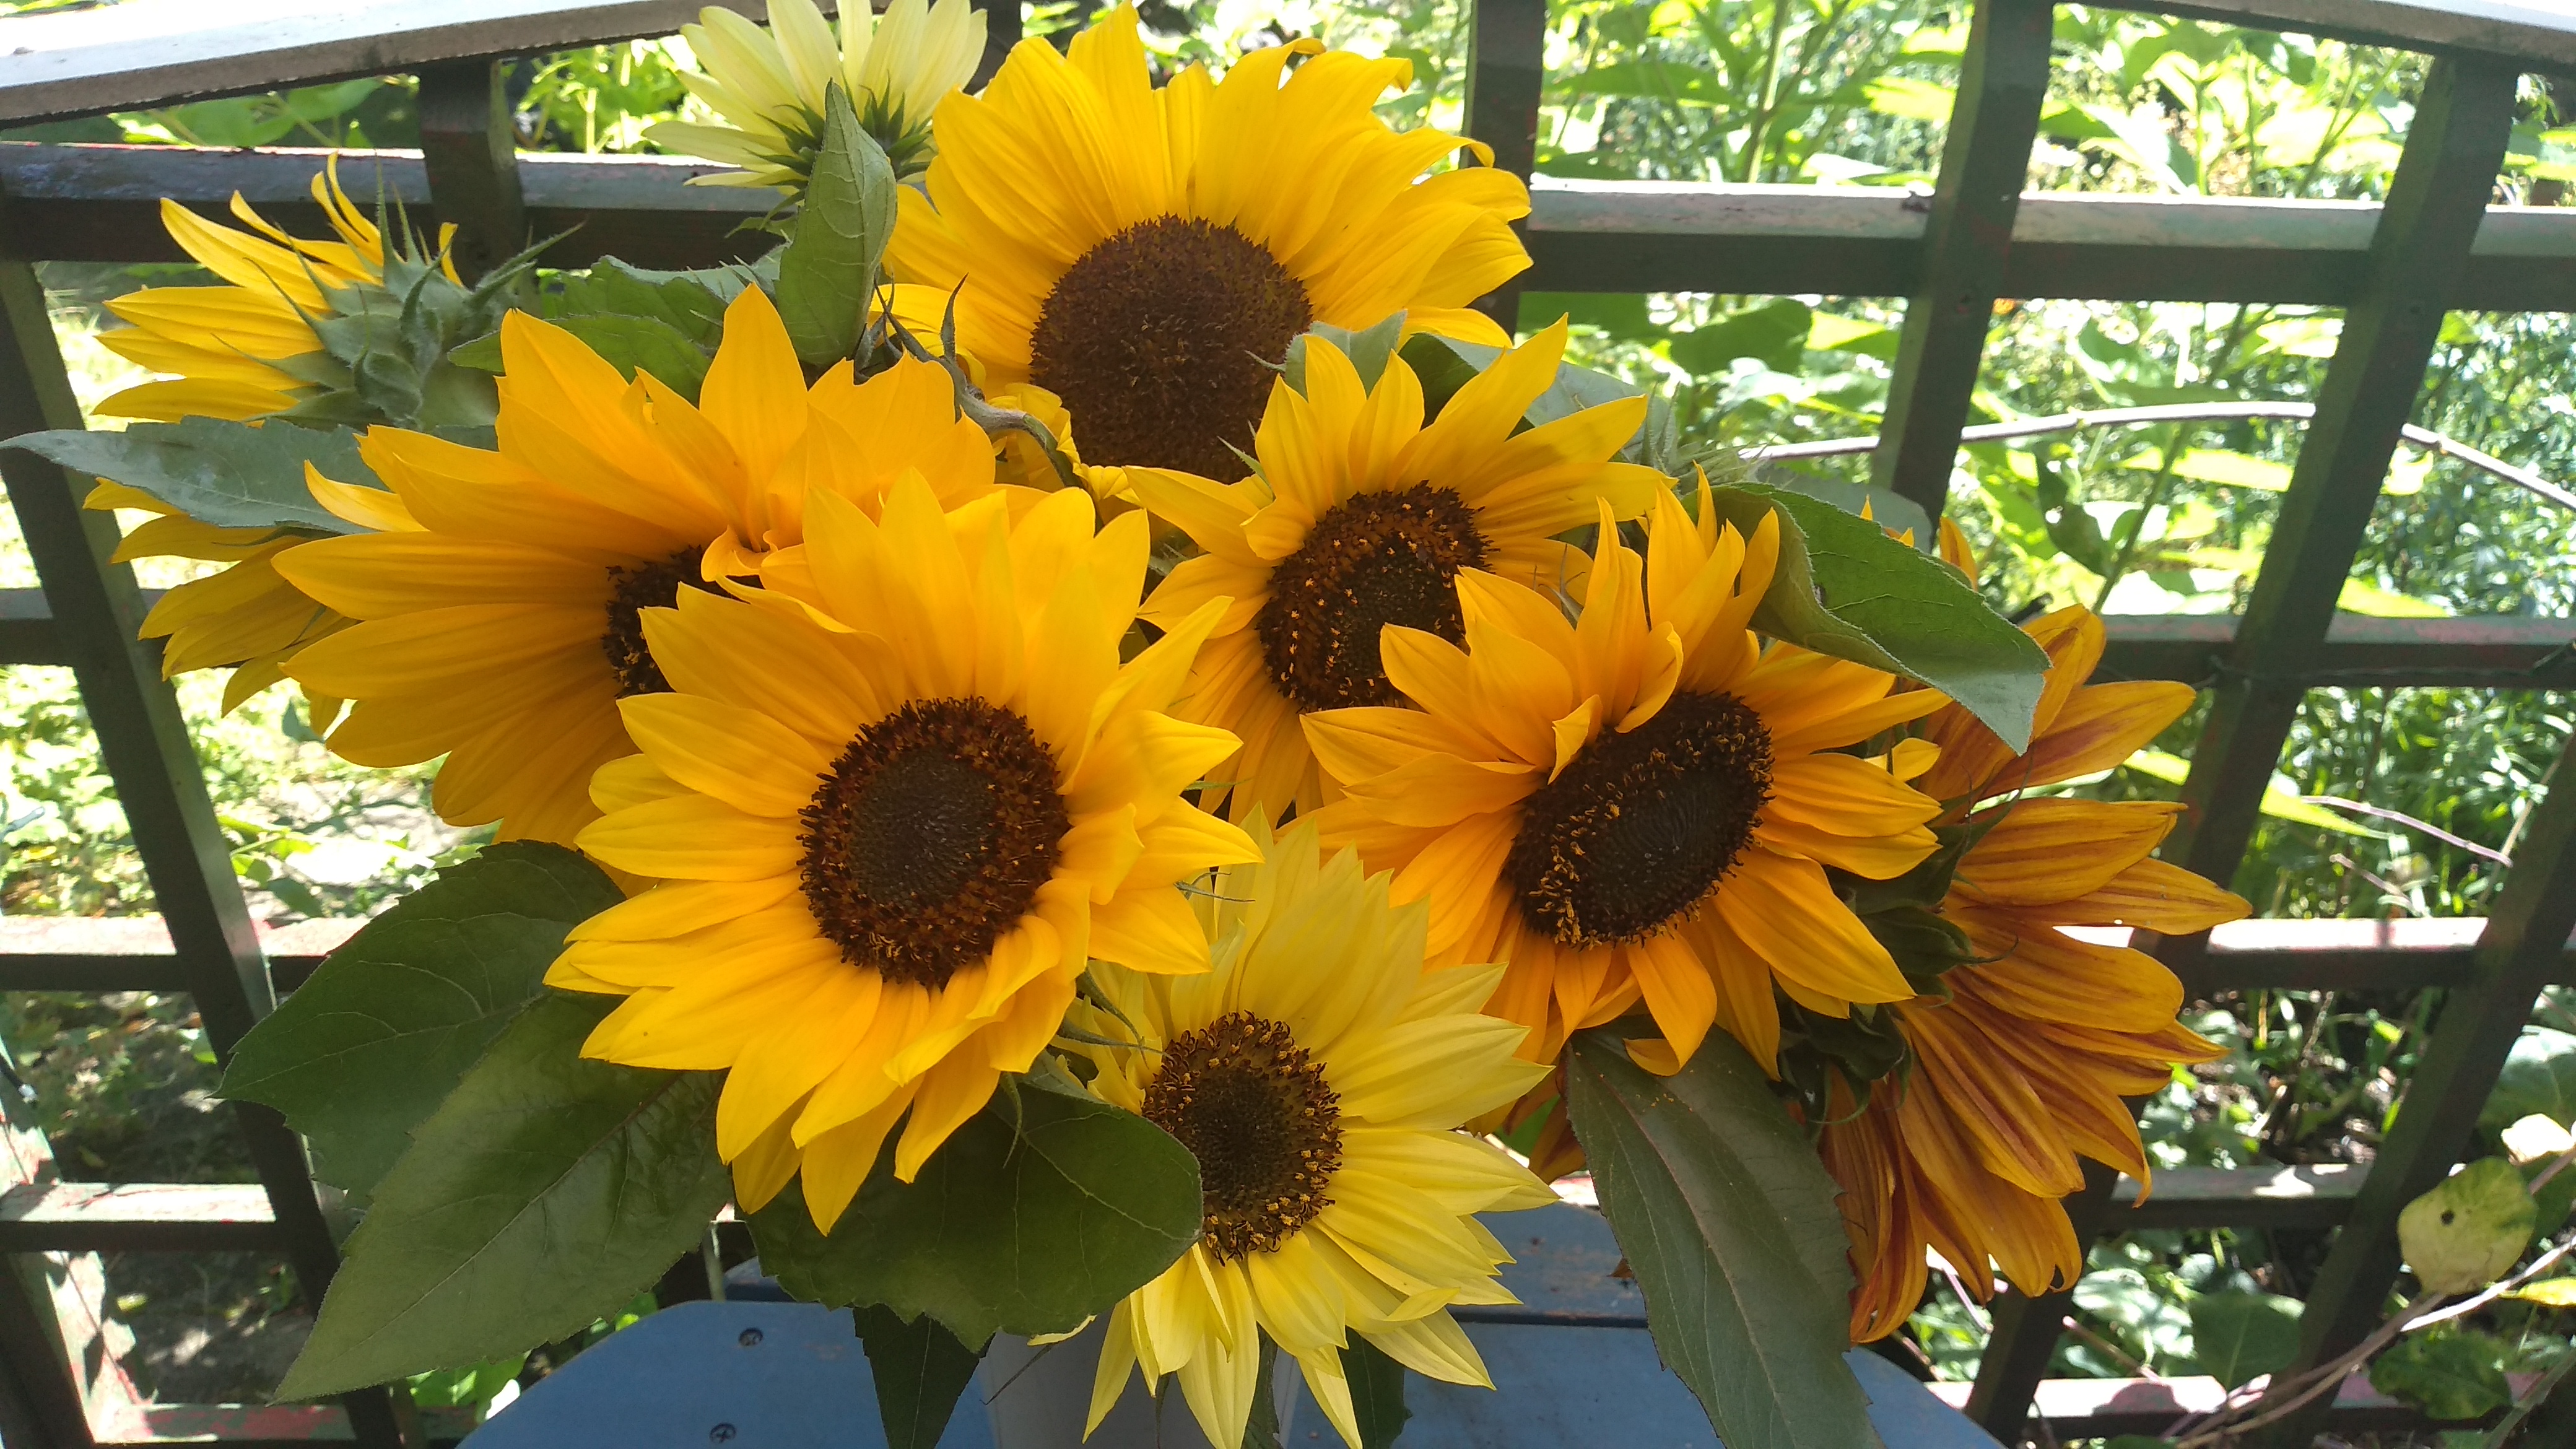 Time to sow some sunshine! Sunflowers to make you smile.